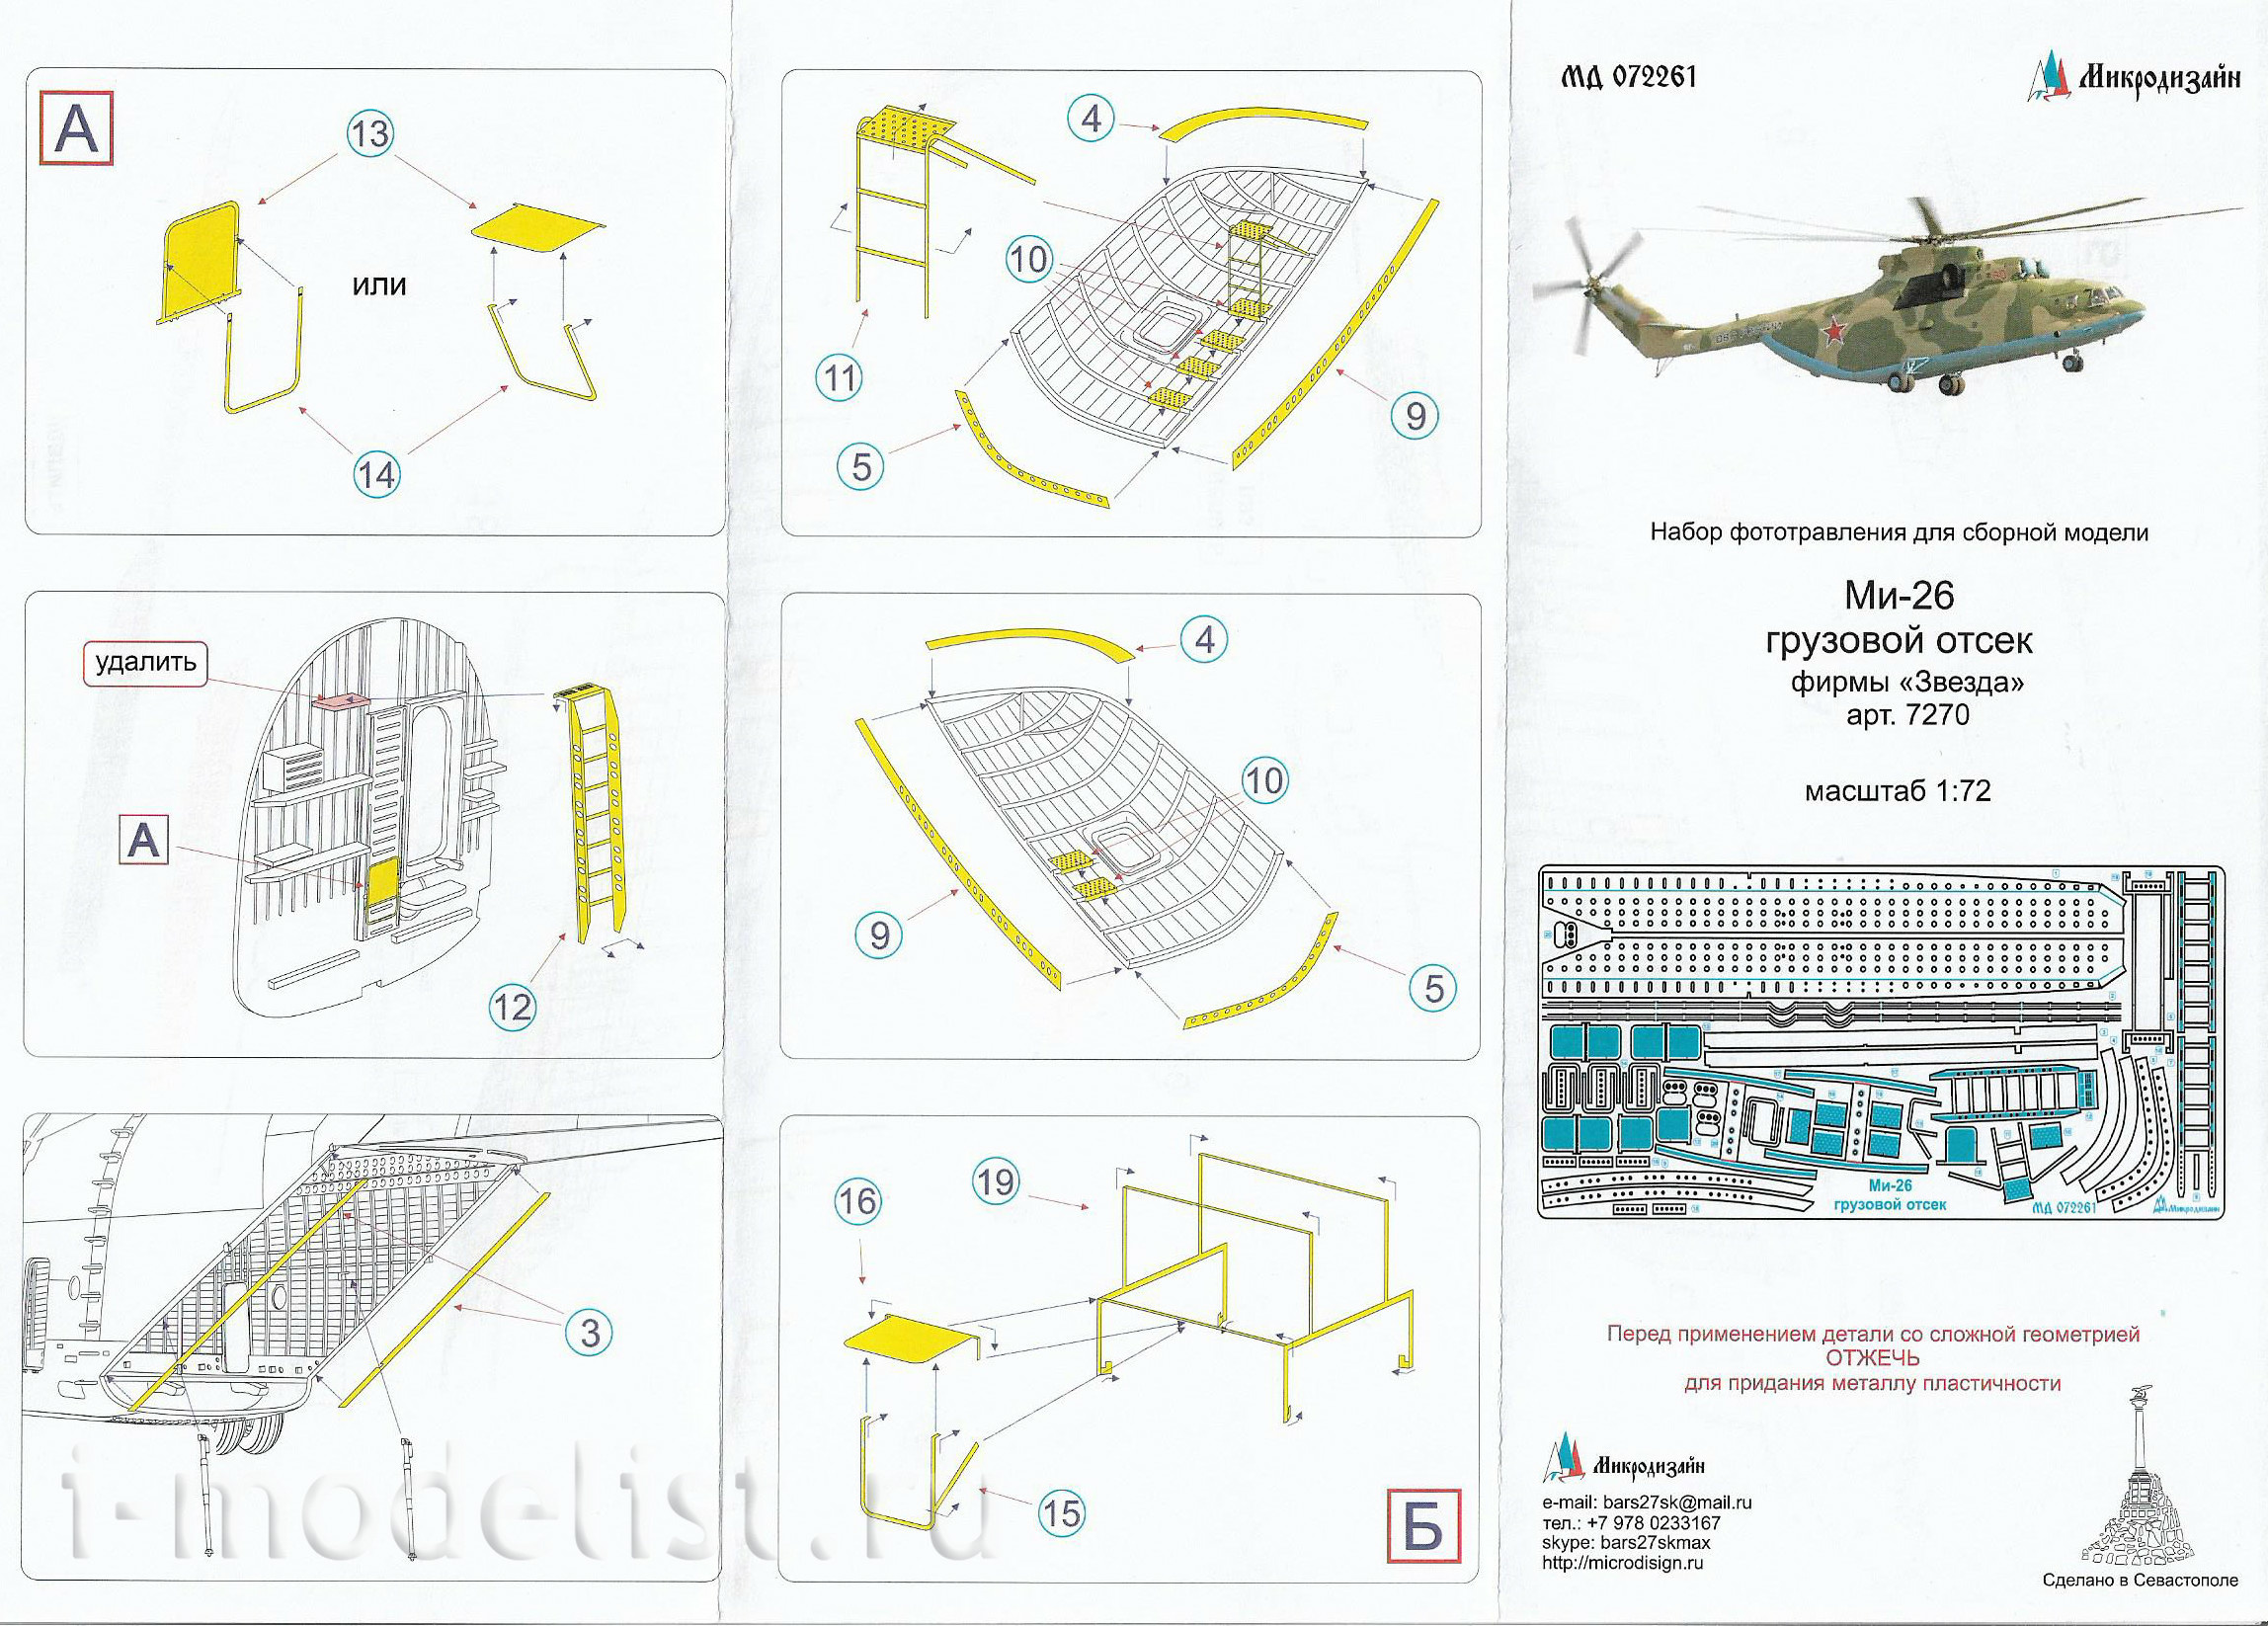 072261 Microdesign of photo-etched parts 1/72 cargo compartment (Zvezda)